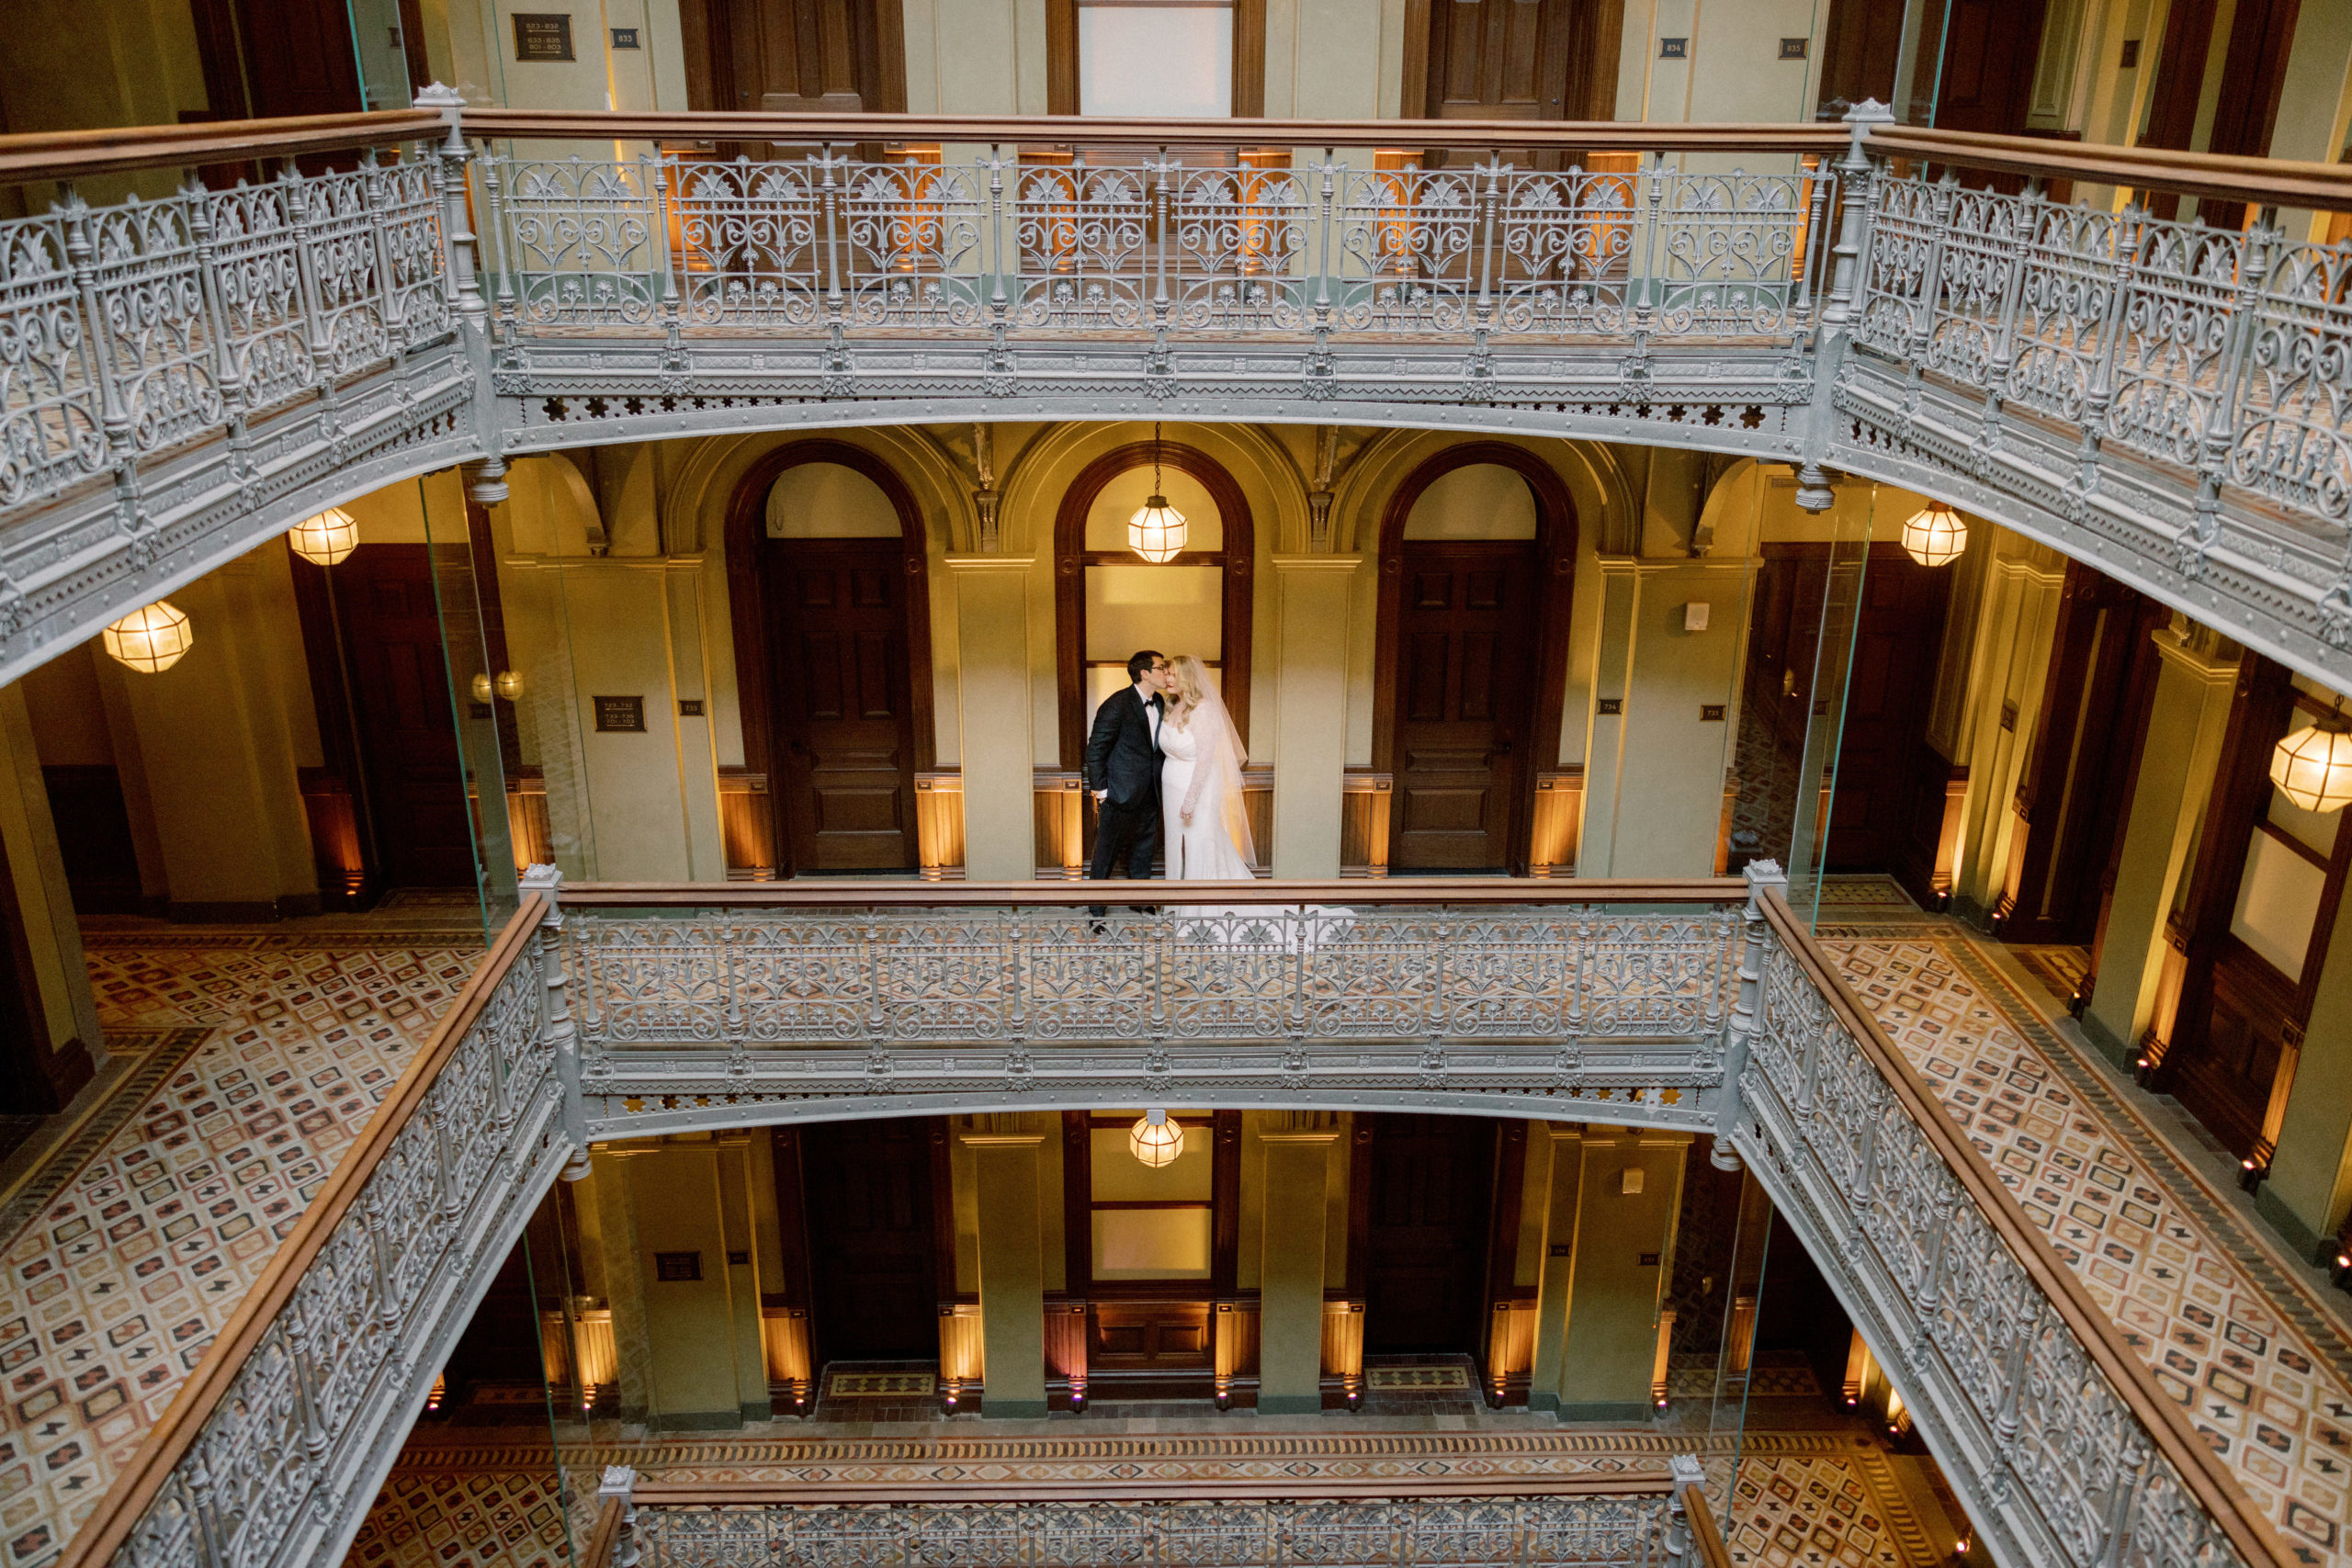 The groom is kissing the bride in a beautiful hotel. NYC wedding venue image by Jenny Fu Studio